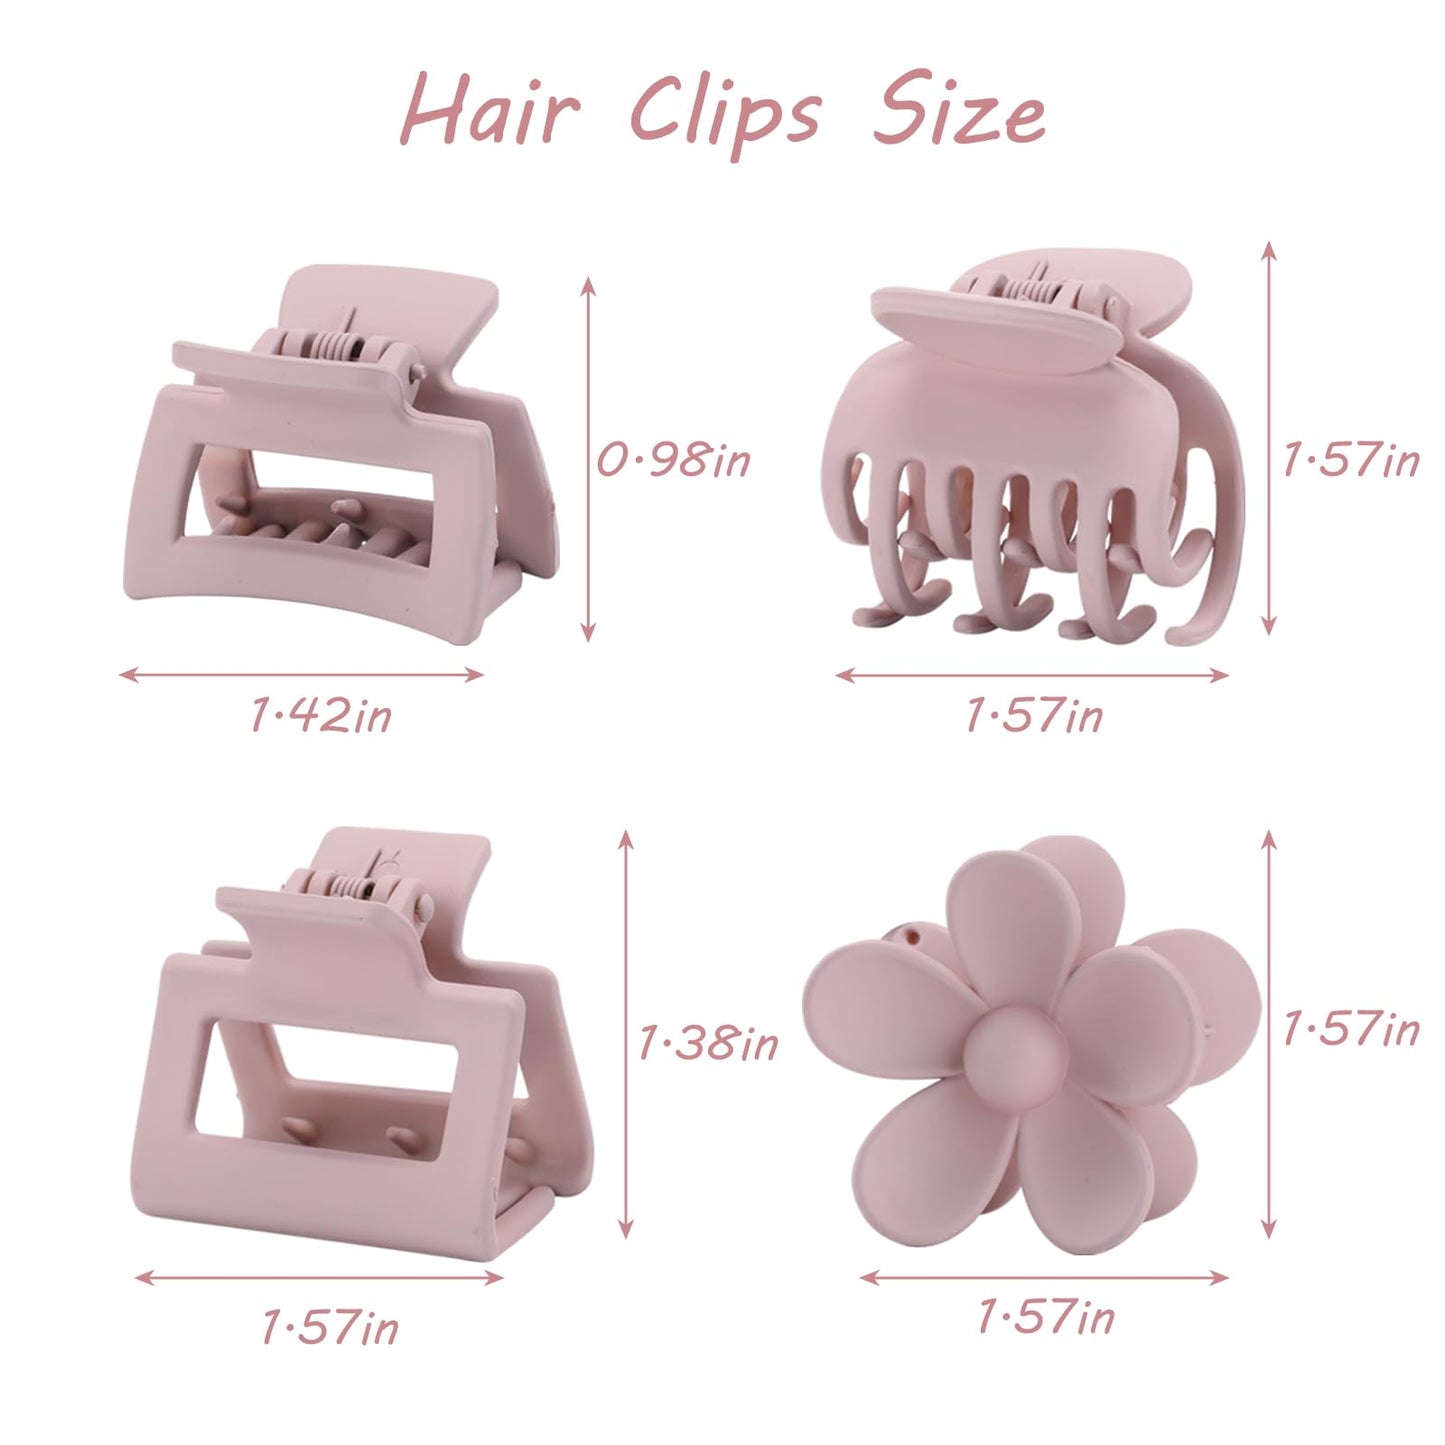 16 PCS Small Claw Clips for Thin Medium Thick Hair, 4 Shapes Small Hair Clips, Cute Flower Claw Clips for Women Girls, Mini Hair Clips for Kids, Durable Strong Hold Hair Accessories, Macaroon Colors